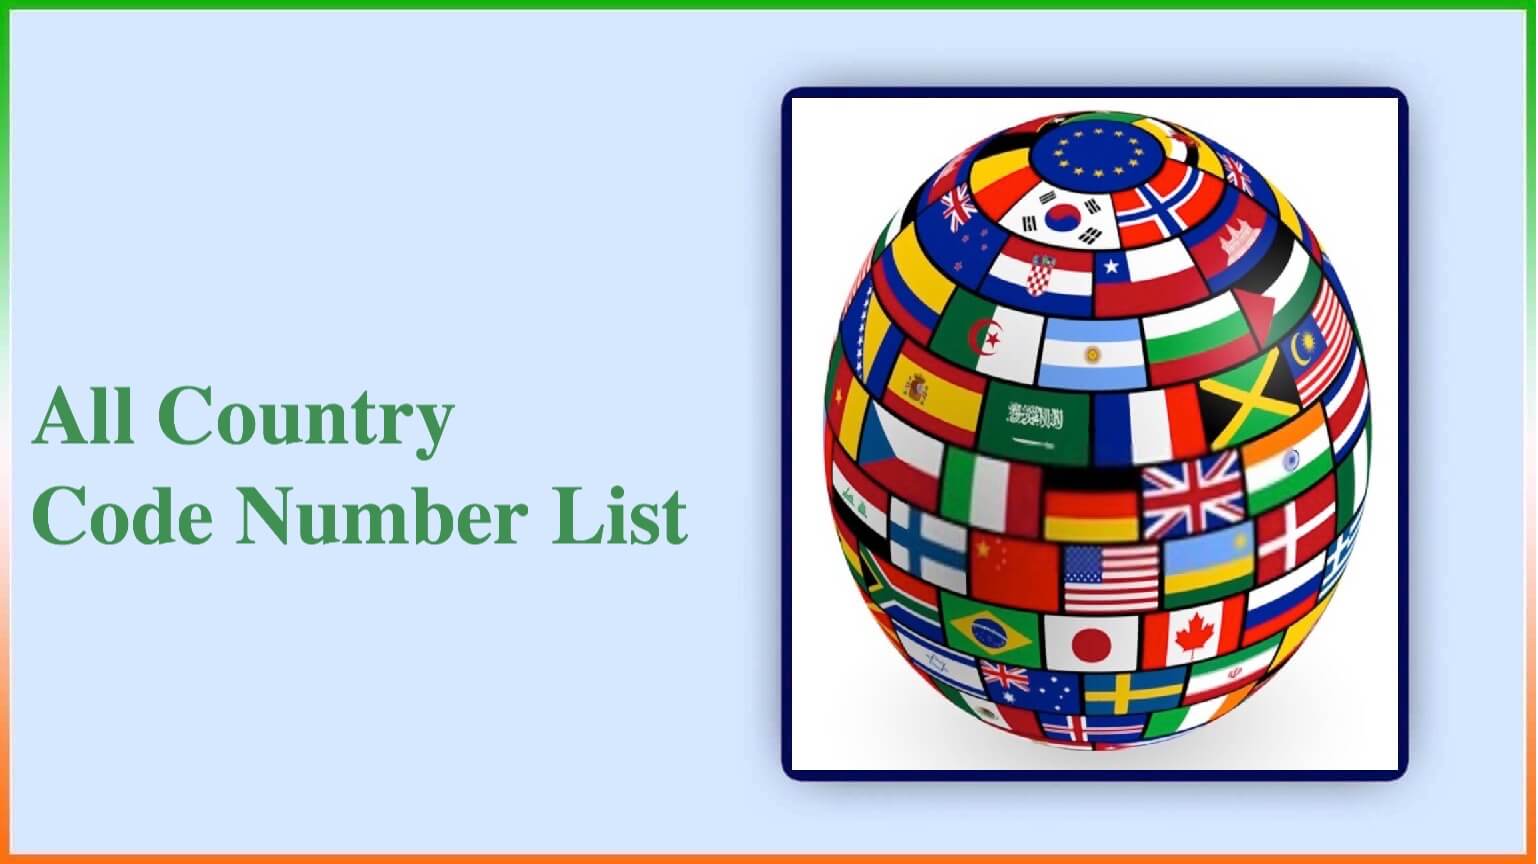 All Country Code Number List